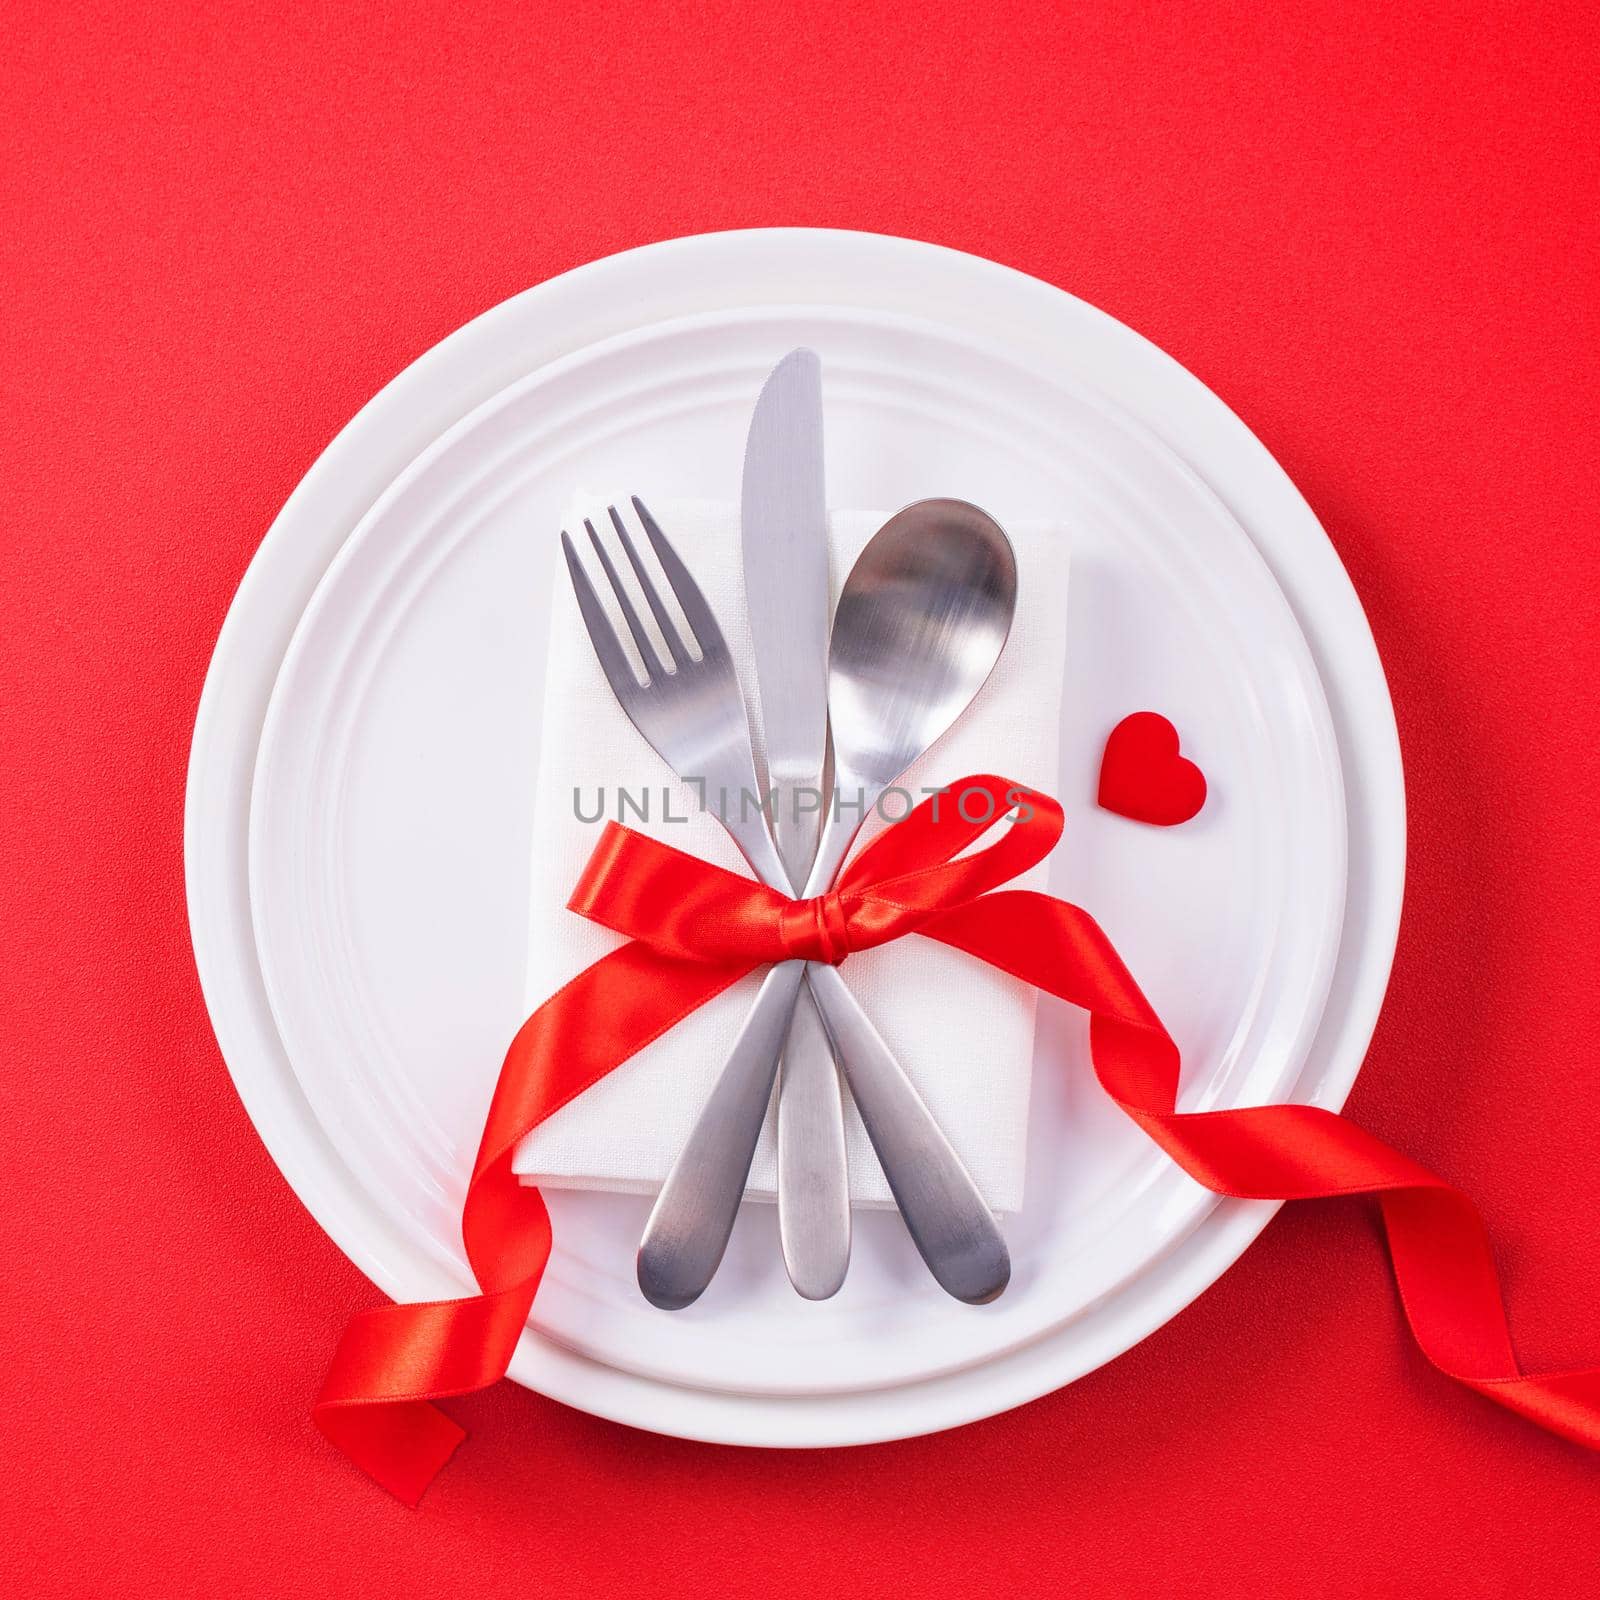 Valentine's Day meal design concept - Romantic plate dish set isolated on red background for restaurant, holiday celebration promotion, top view, flat lay. by ROMIXIMAGE